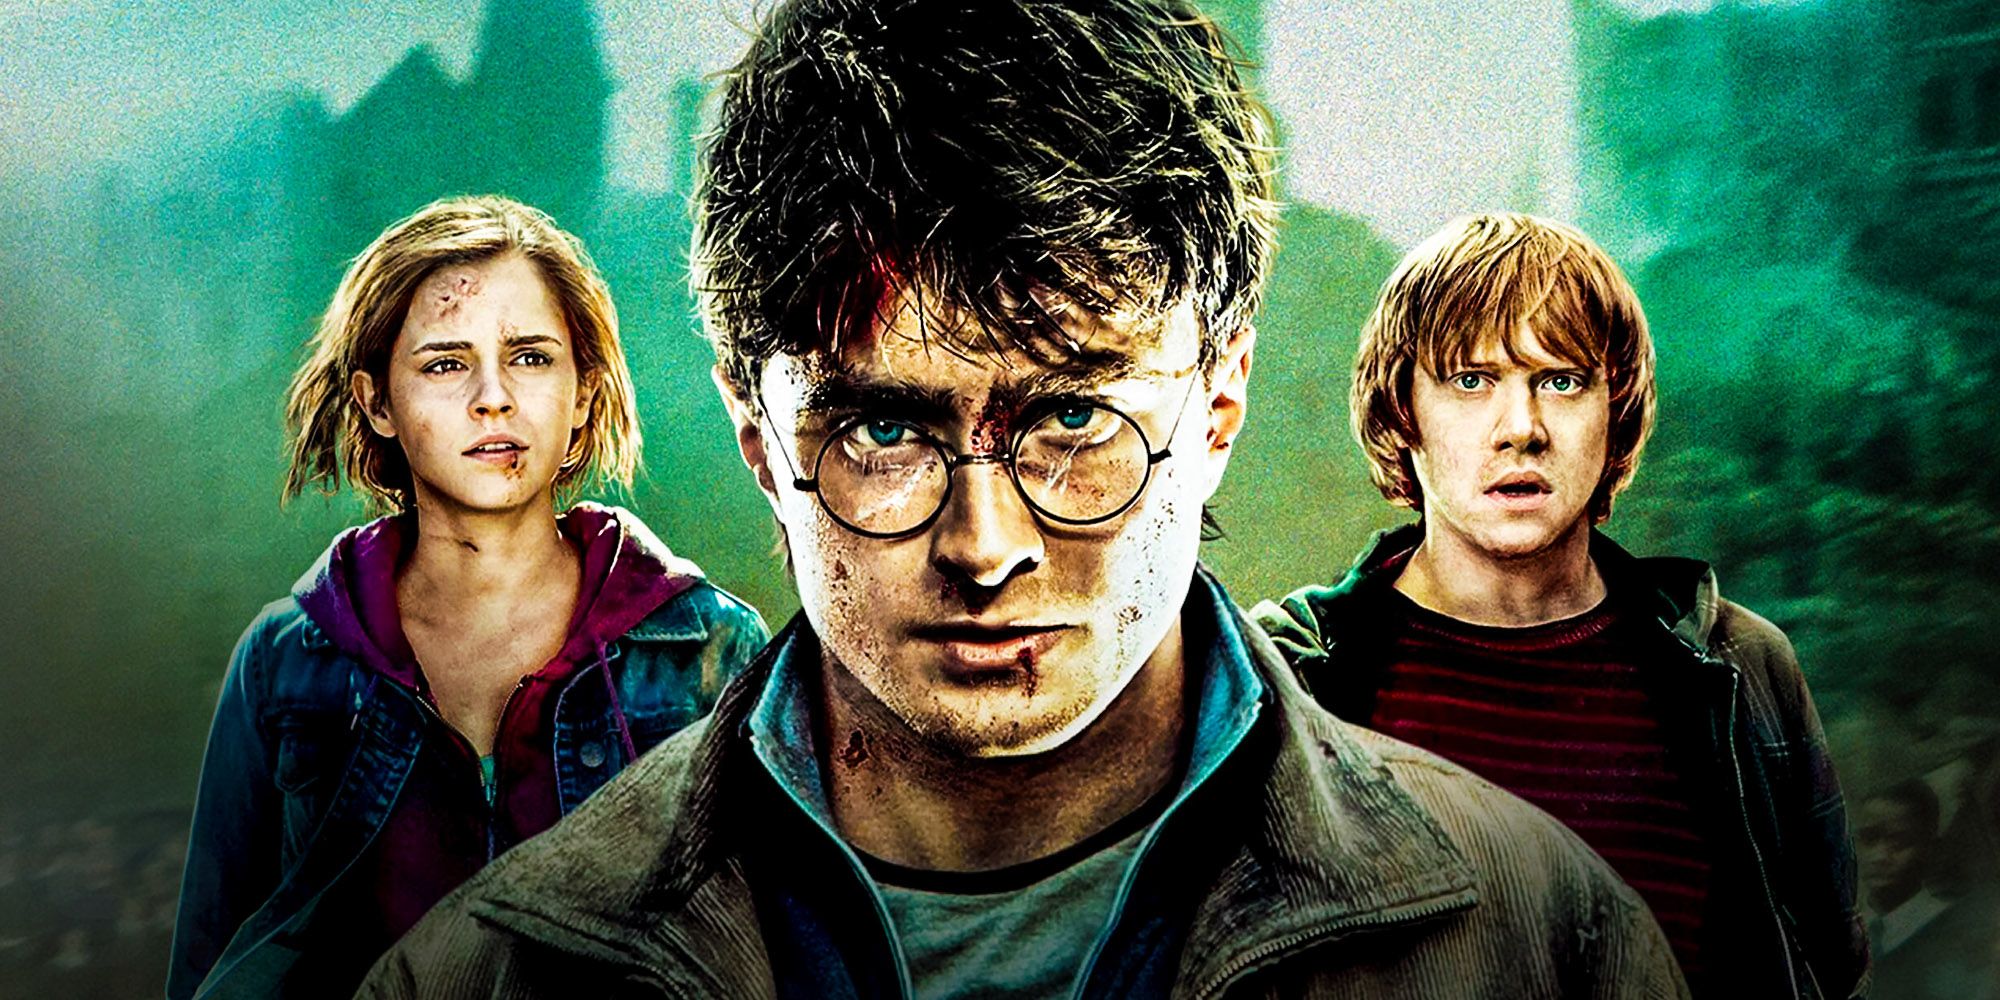 Harry Potter, Hermione Granger, and Ron Weasley feature in a promotional image for Deathly Hallows Part 2